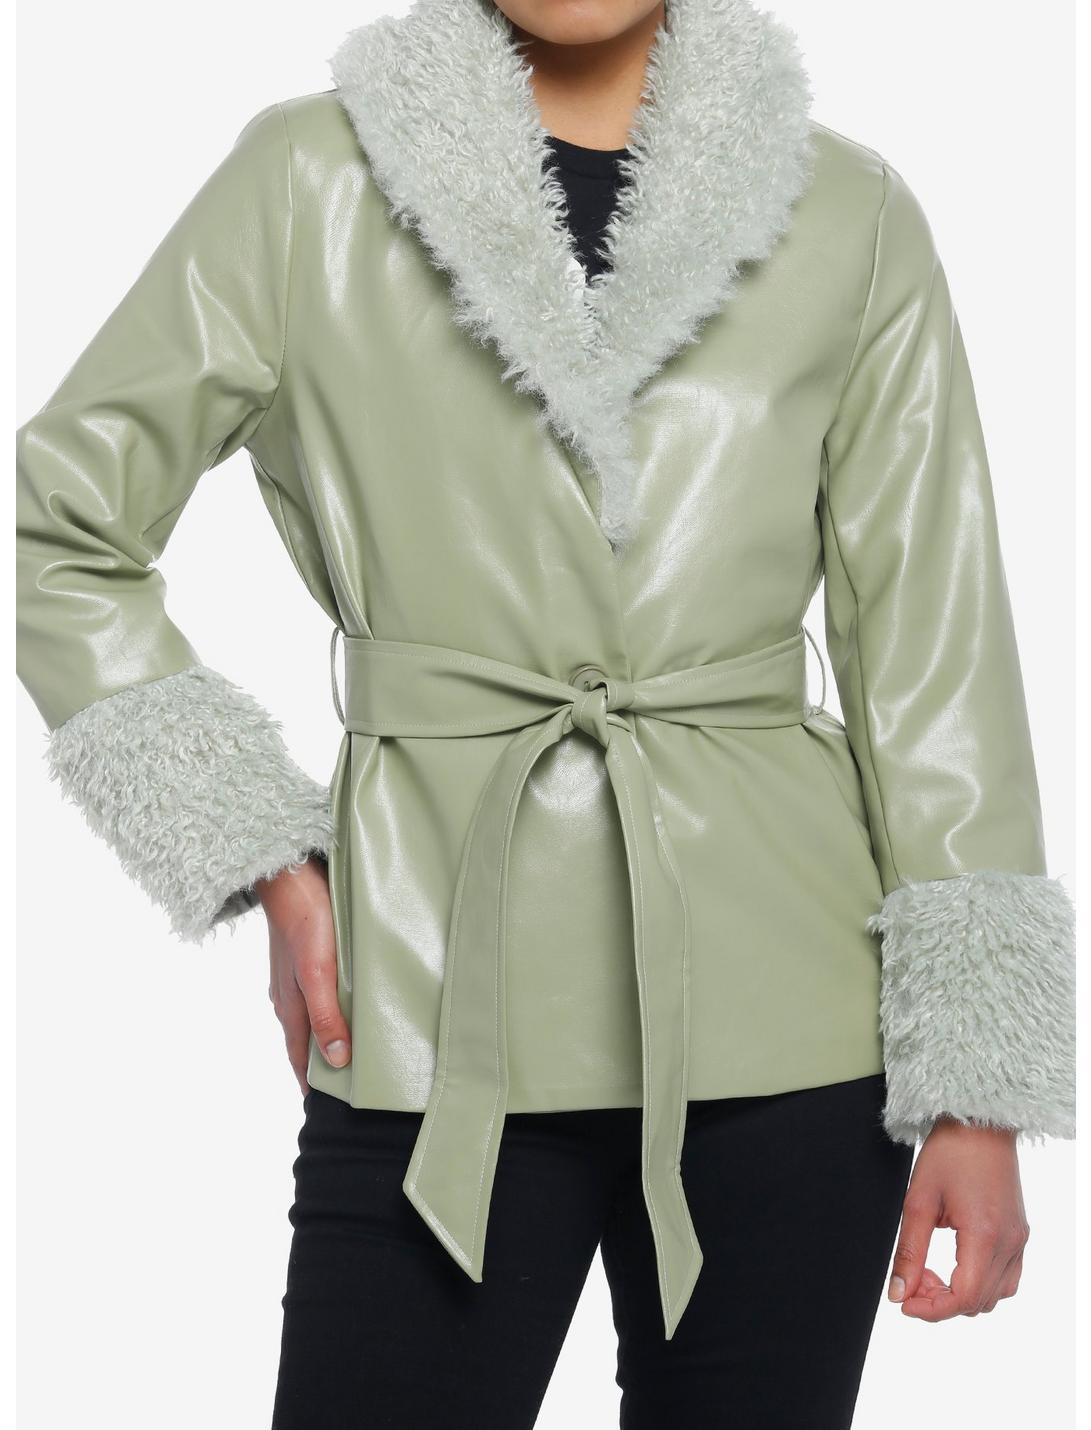 Green Fuzzy Trim Girls Faux Leather Jacket, GREEN, hi-res